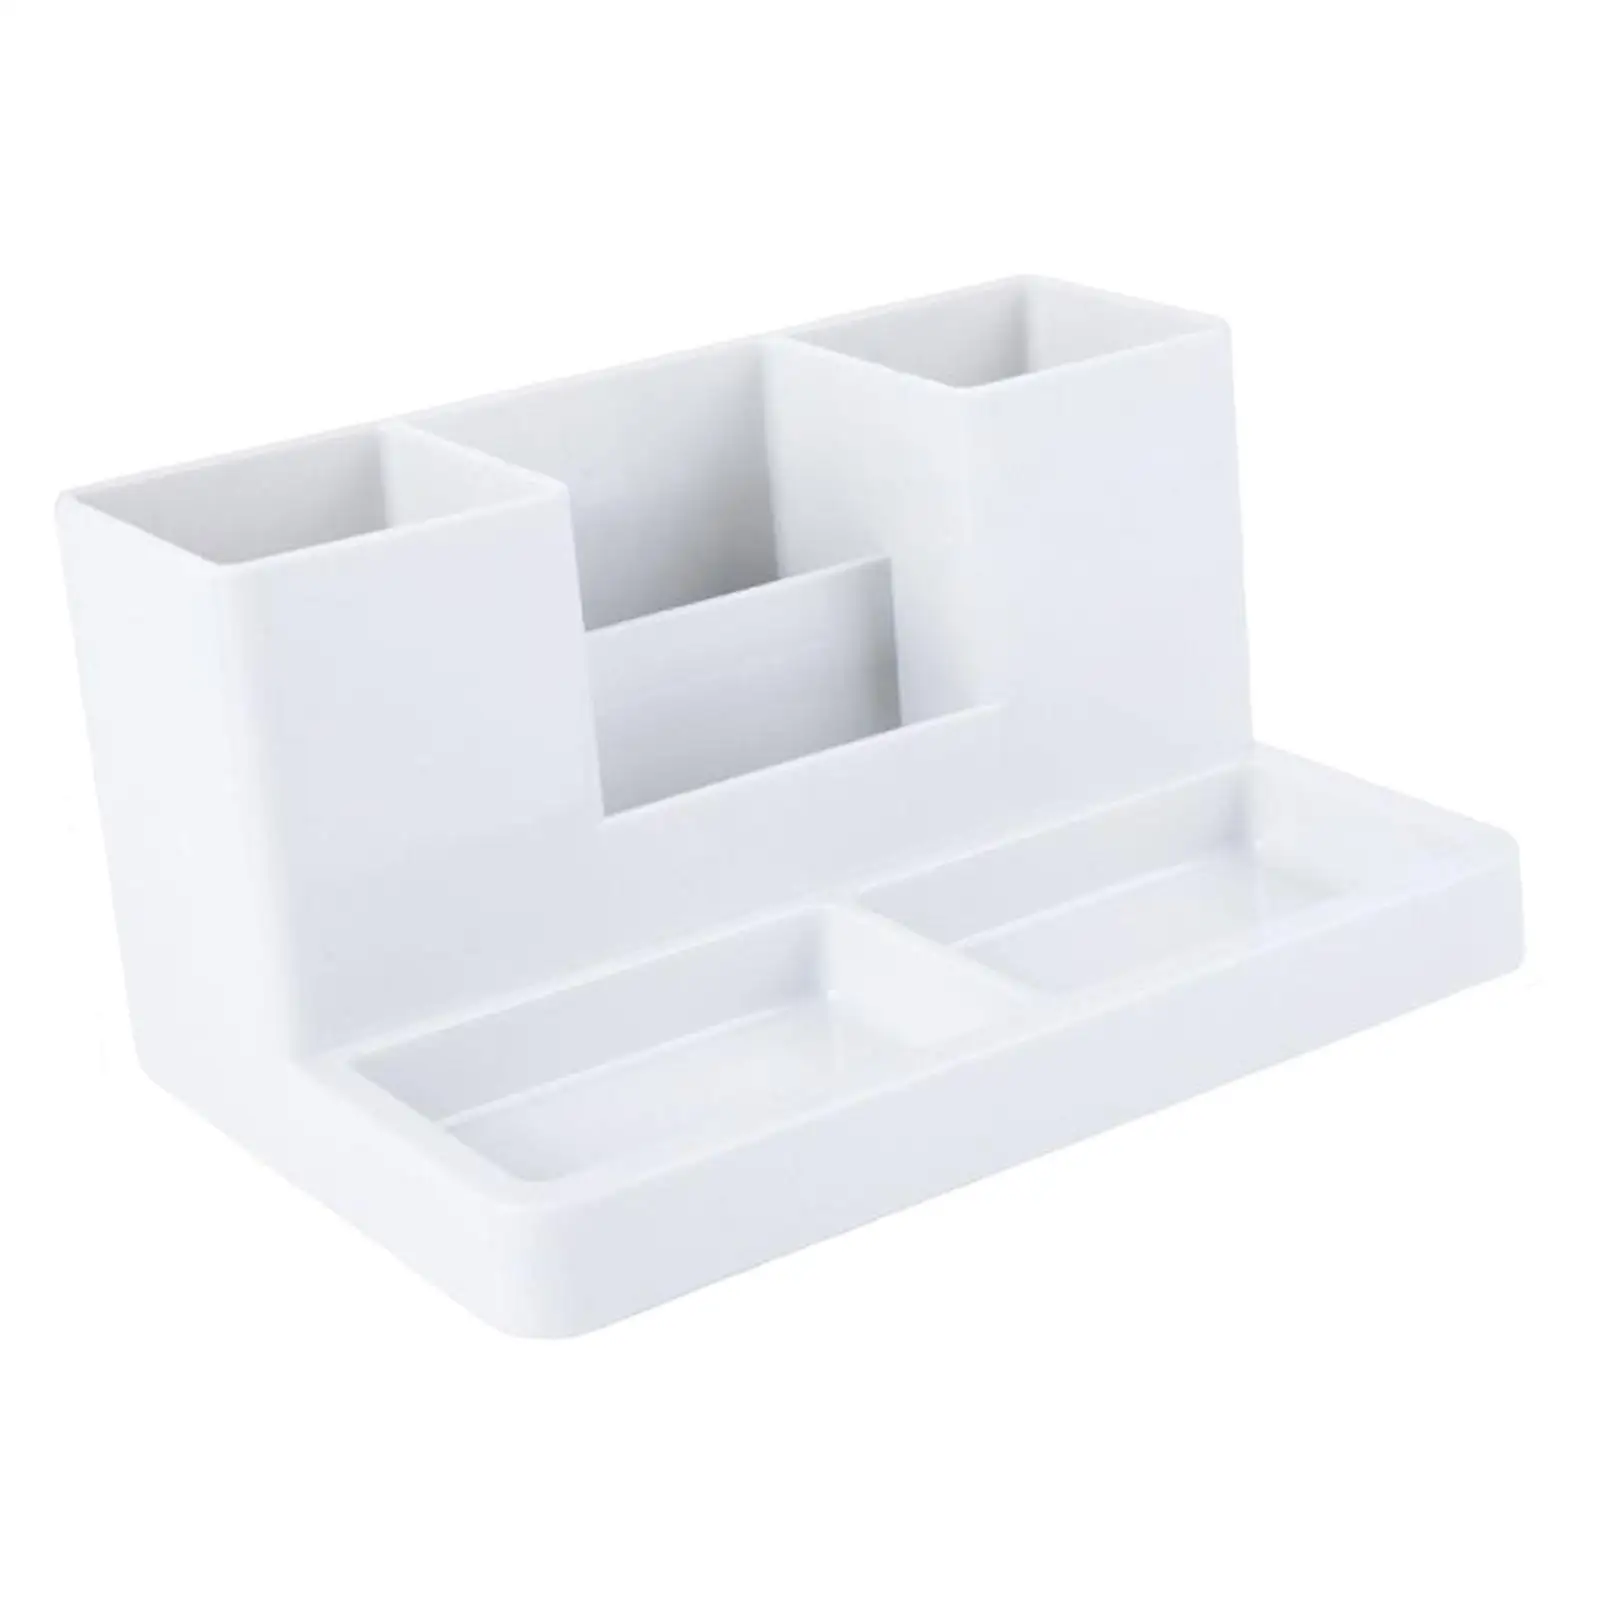 Makeup Storage Box Business Card/Pen/Pencil Holder Storage Box Case Sticky Note Tray Desktop Organizer with Pencil Holders